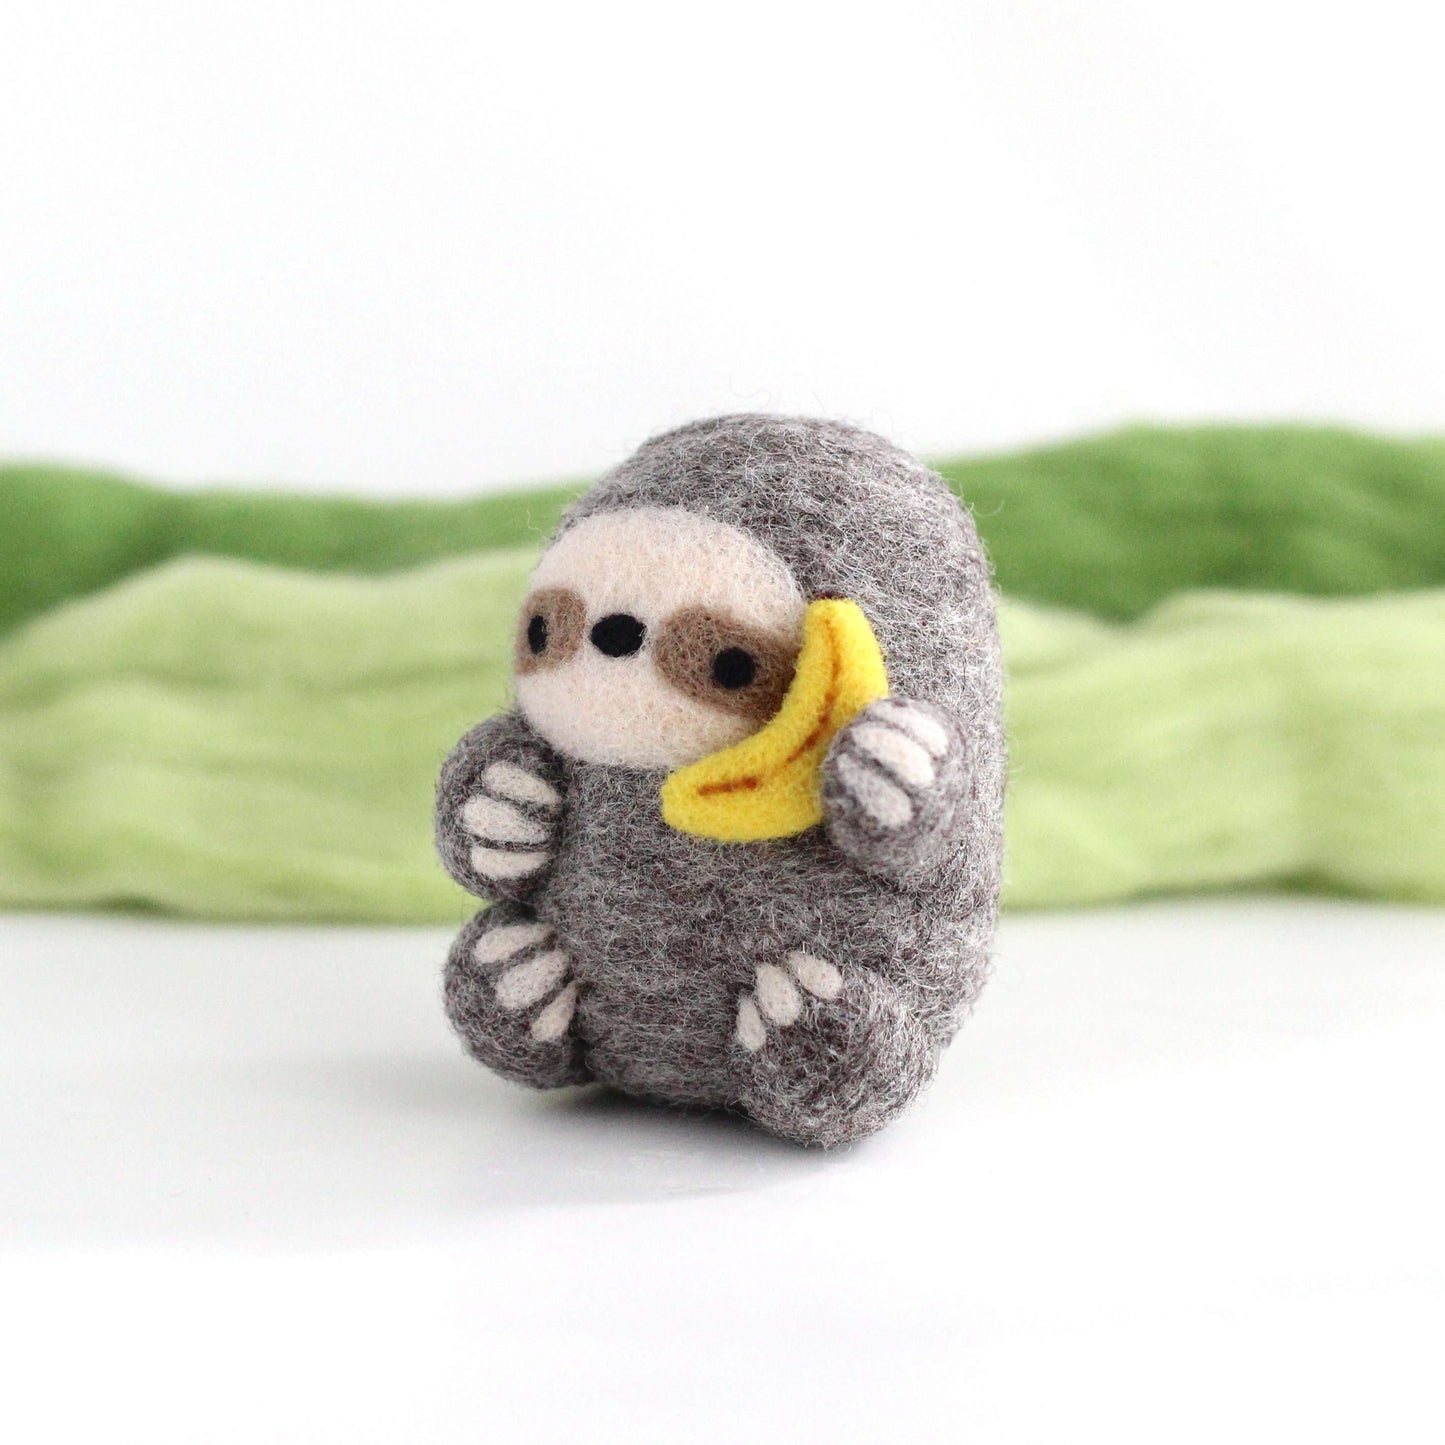 Needle Felted Sloth holding Banana Phone by Wild Whimsy Woolies